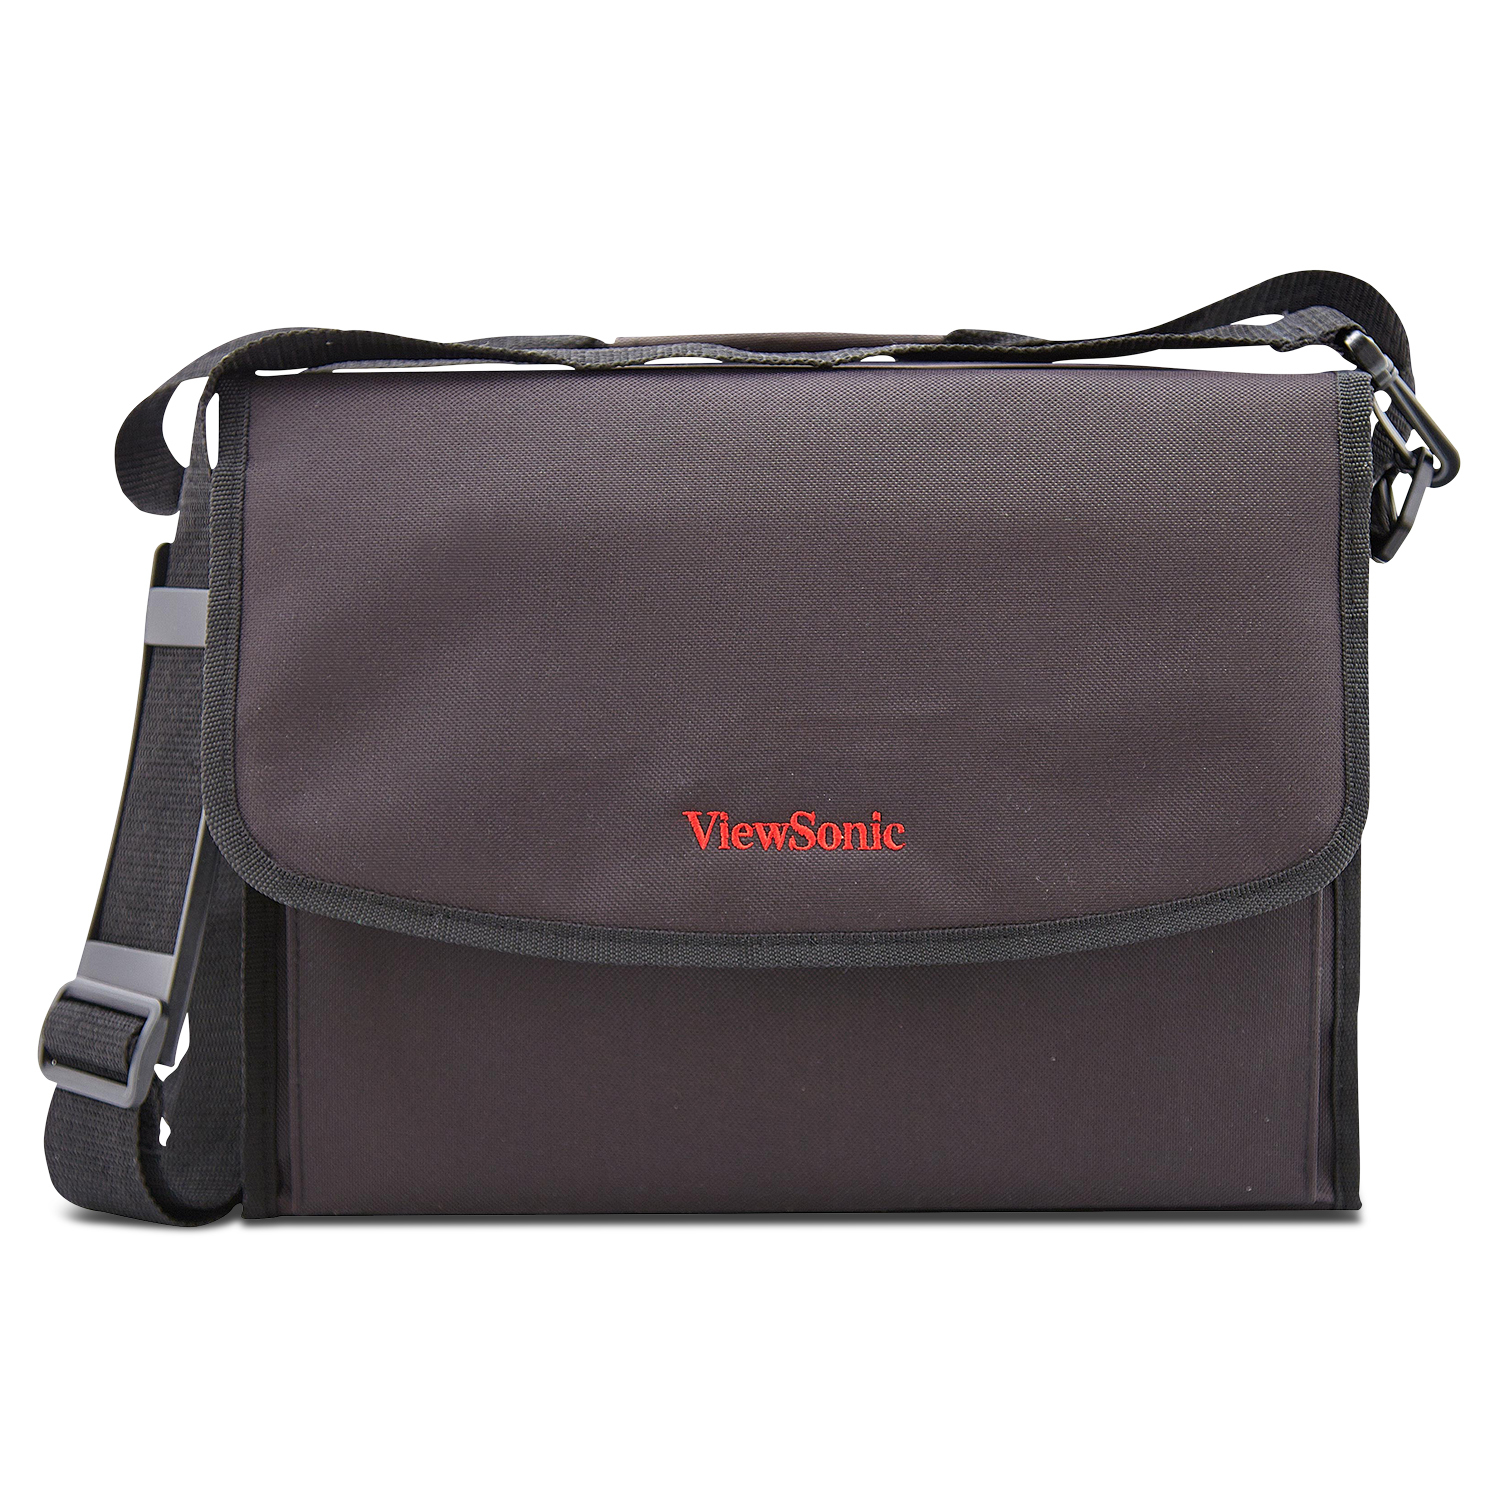 Viewsonic - B2b And Installation Pj-case-008 Carry Case F/           Pjd5153/pjd5155/pjd5250/pjd5253     Pj-case-008